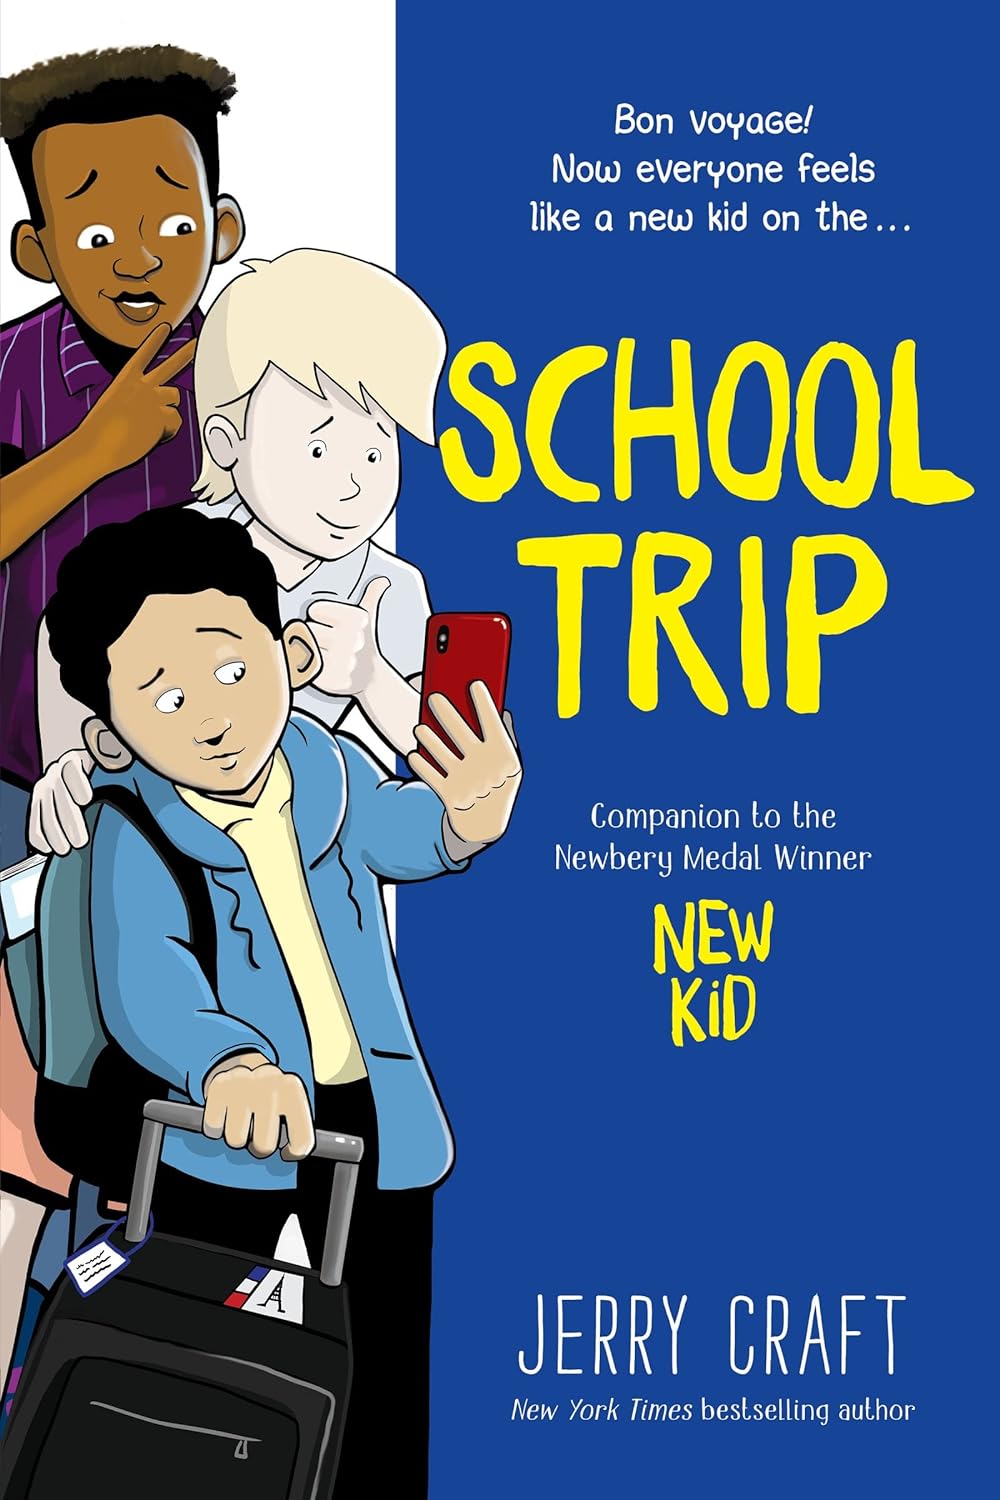 Hurry! Grab Your Copy of School Trip: A Graphic Novel (The New Kid) Now!